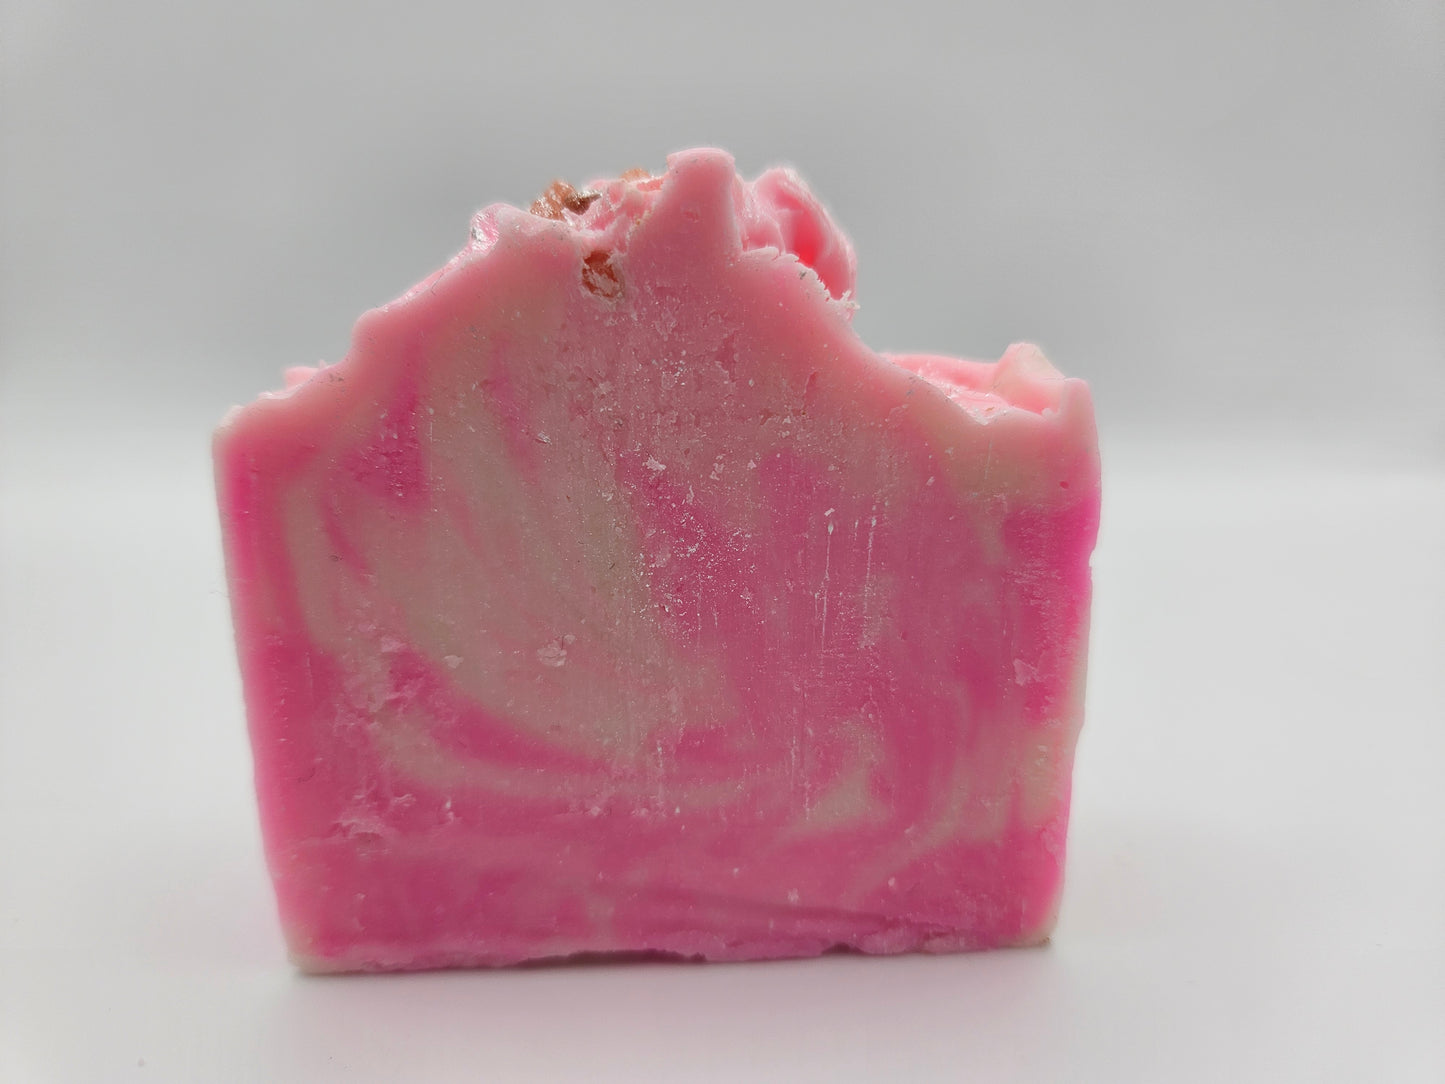 "Pink Opal" Cold Process Soap